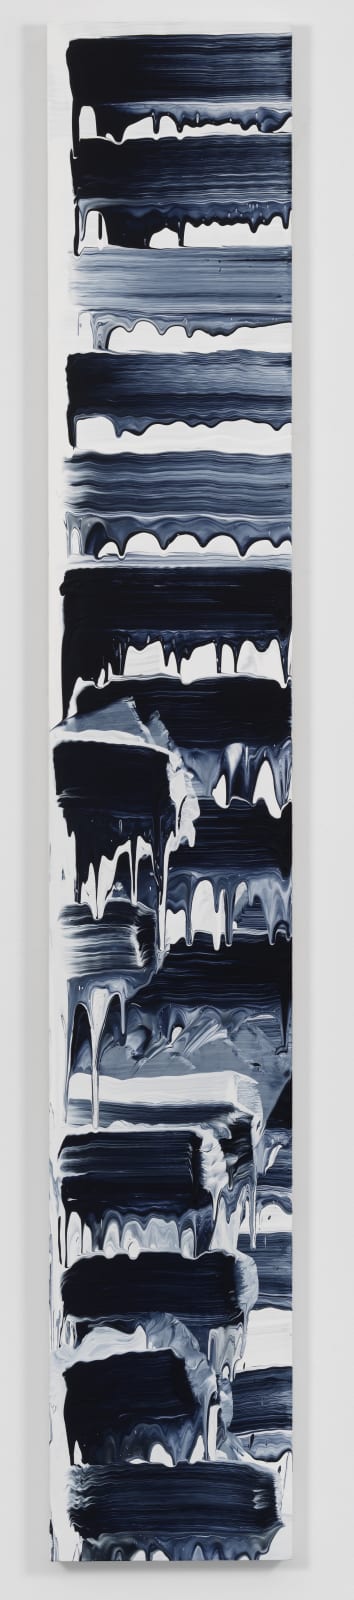 David Reed, #733, 2020, 193 × 27.9 cm / 76 × 11 in, Oil and alkyd on polyester